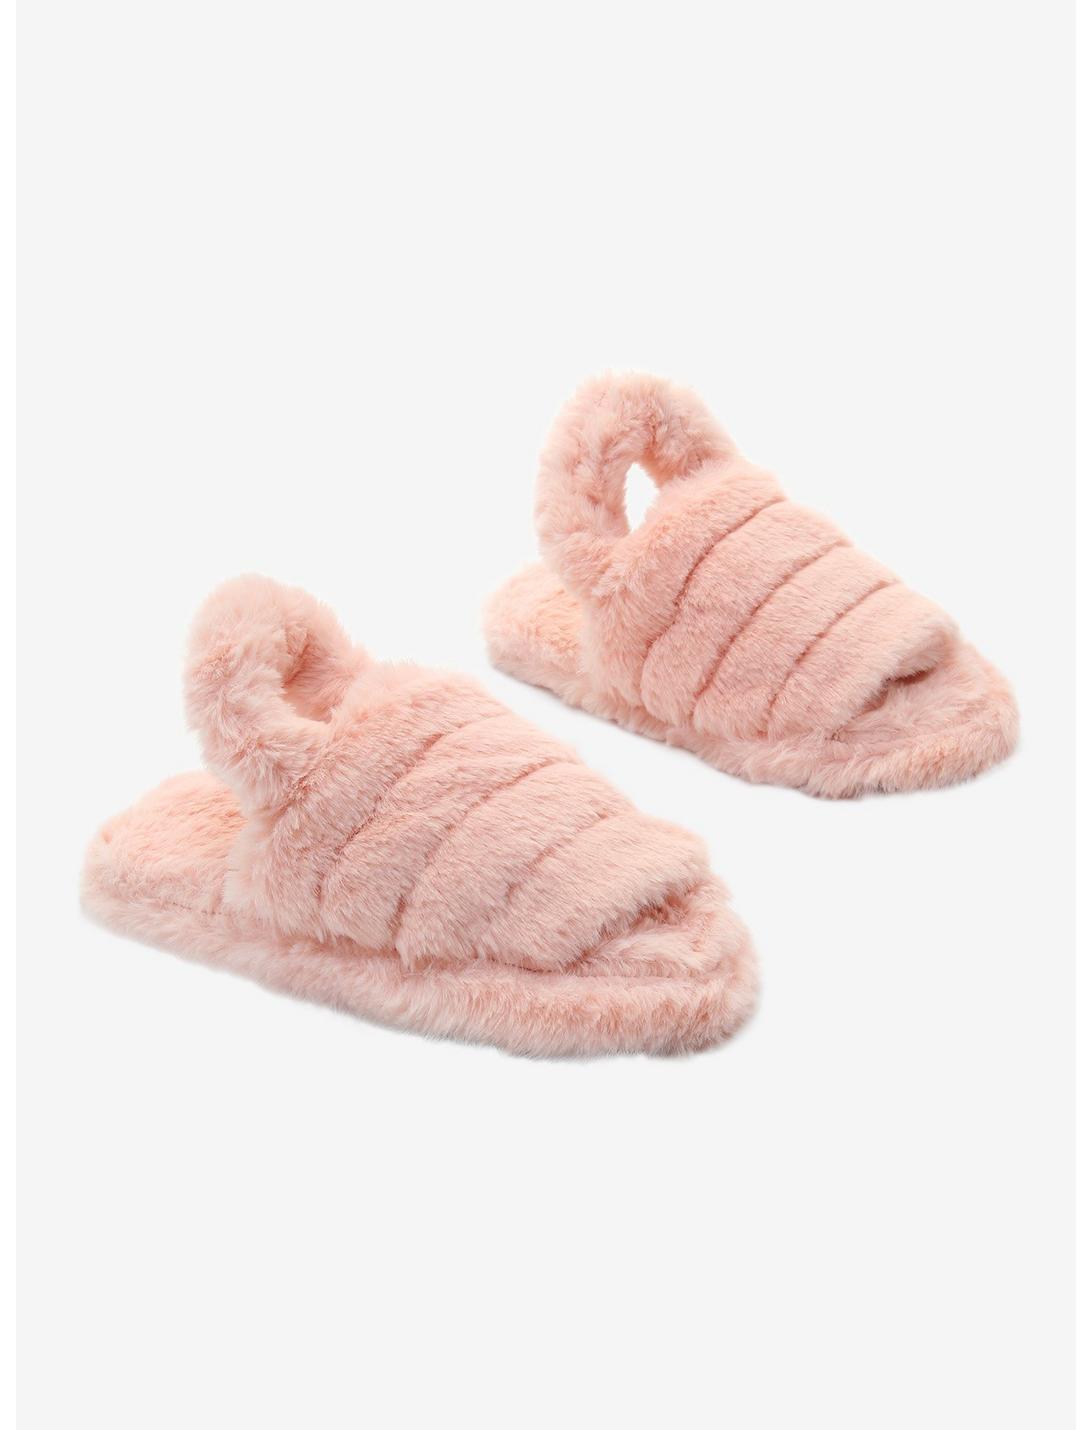 Pink Fuzzy Cozy Slide Slippers, , hi-res